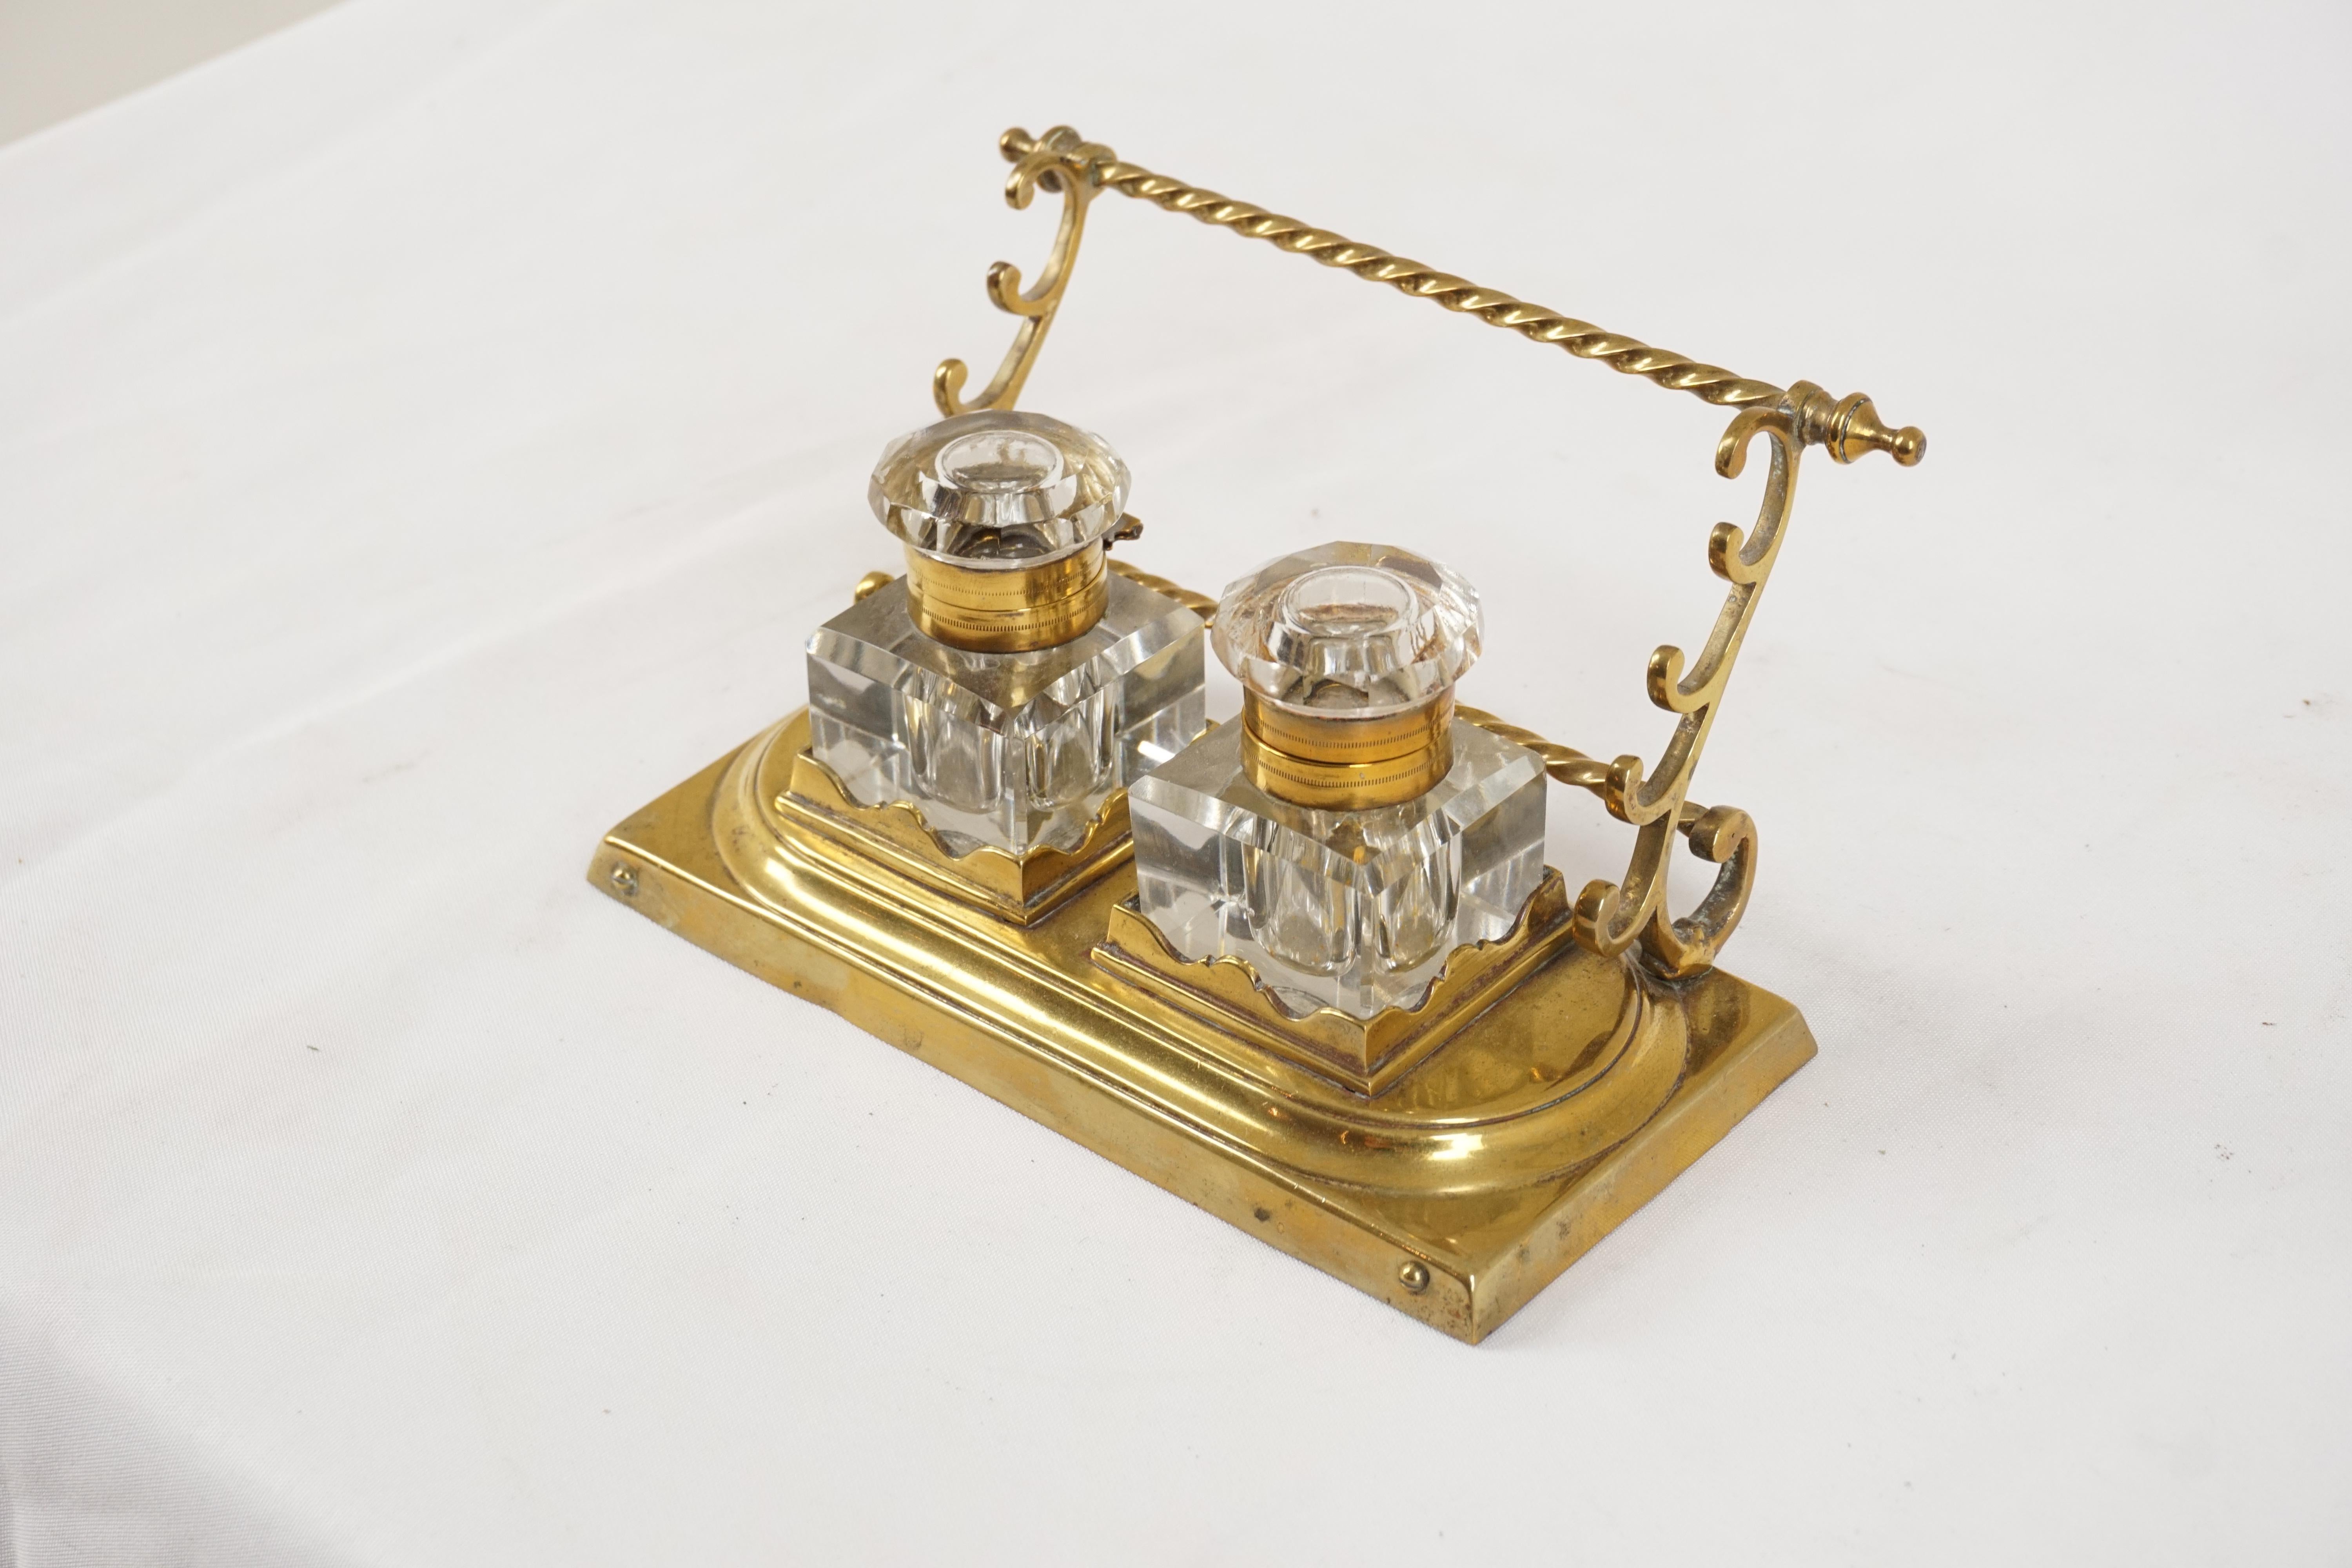 Antique brass double inkstand with pen holders, Scotland 1900, H548

Scotland 1900
Brass & glass
Brass pen holder to the back
Pair of cut glass inkwells
All standing on a shaped base

H548

Measures: 6.75” W x 4” D x 3.5” H.
   